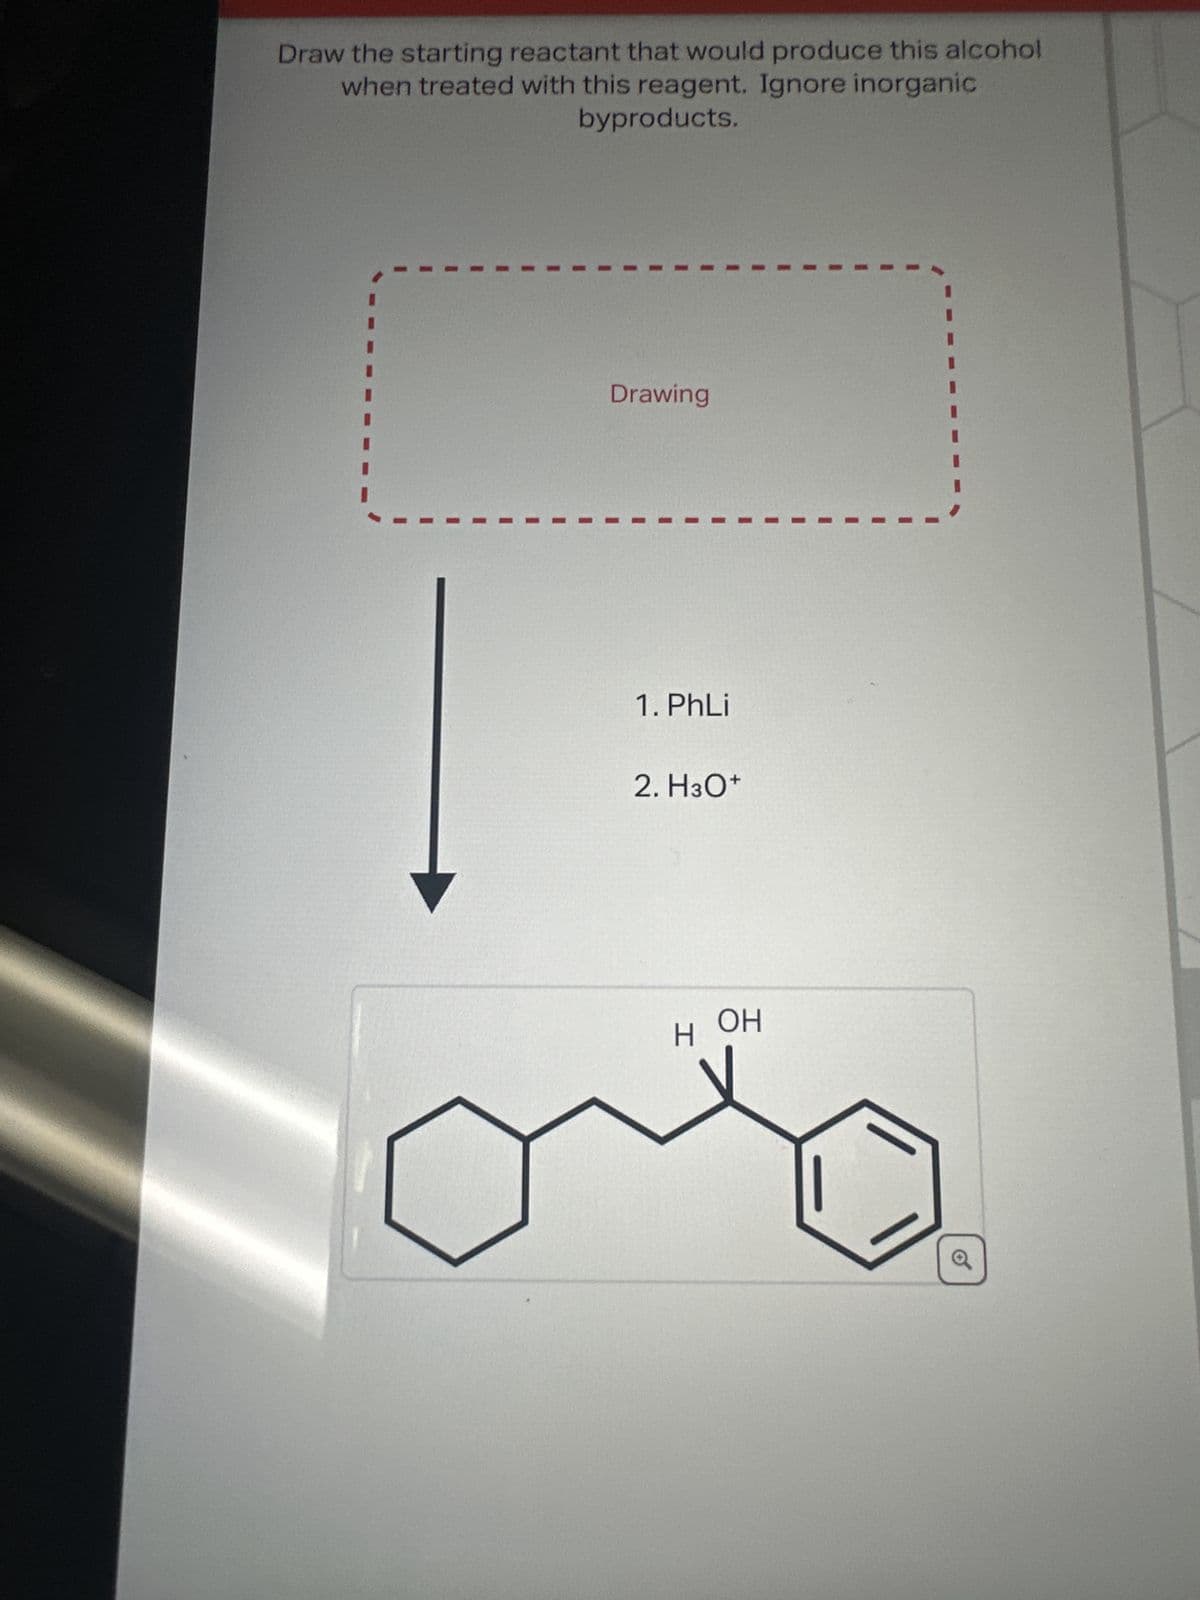 Draw the starting reactant that would produce this alcohol
when treated with this reagent. Ignore inorganic
byproducts.
Drawing
1. PhLi
2. H3O+
HOH